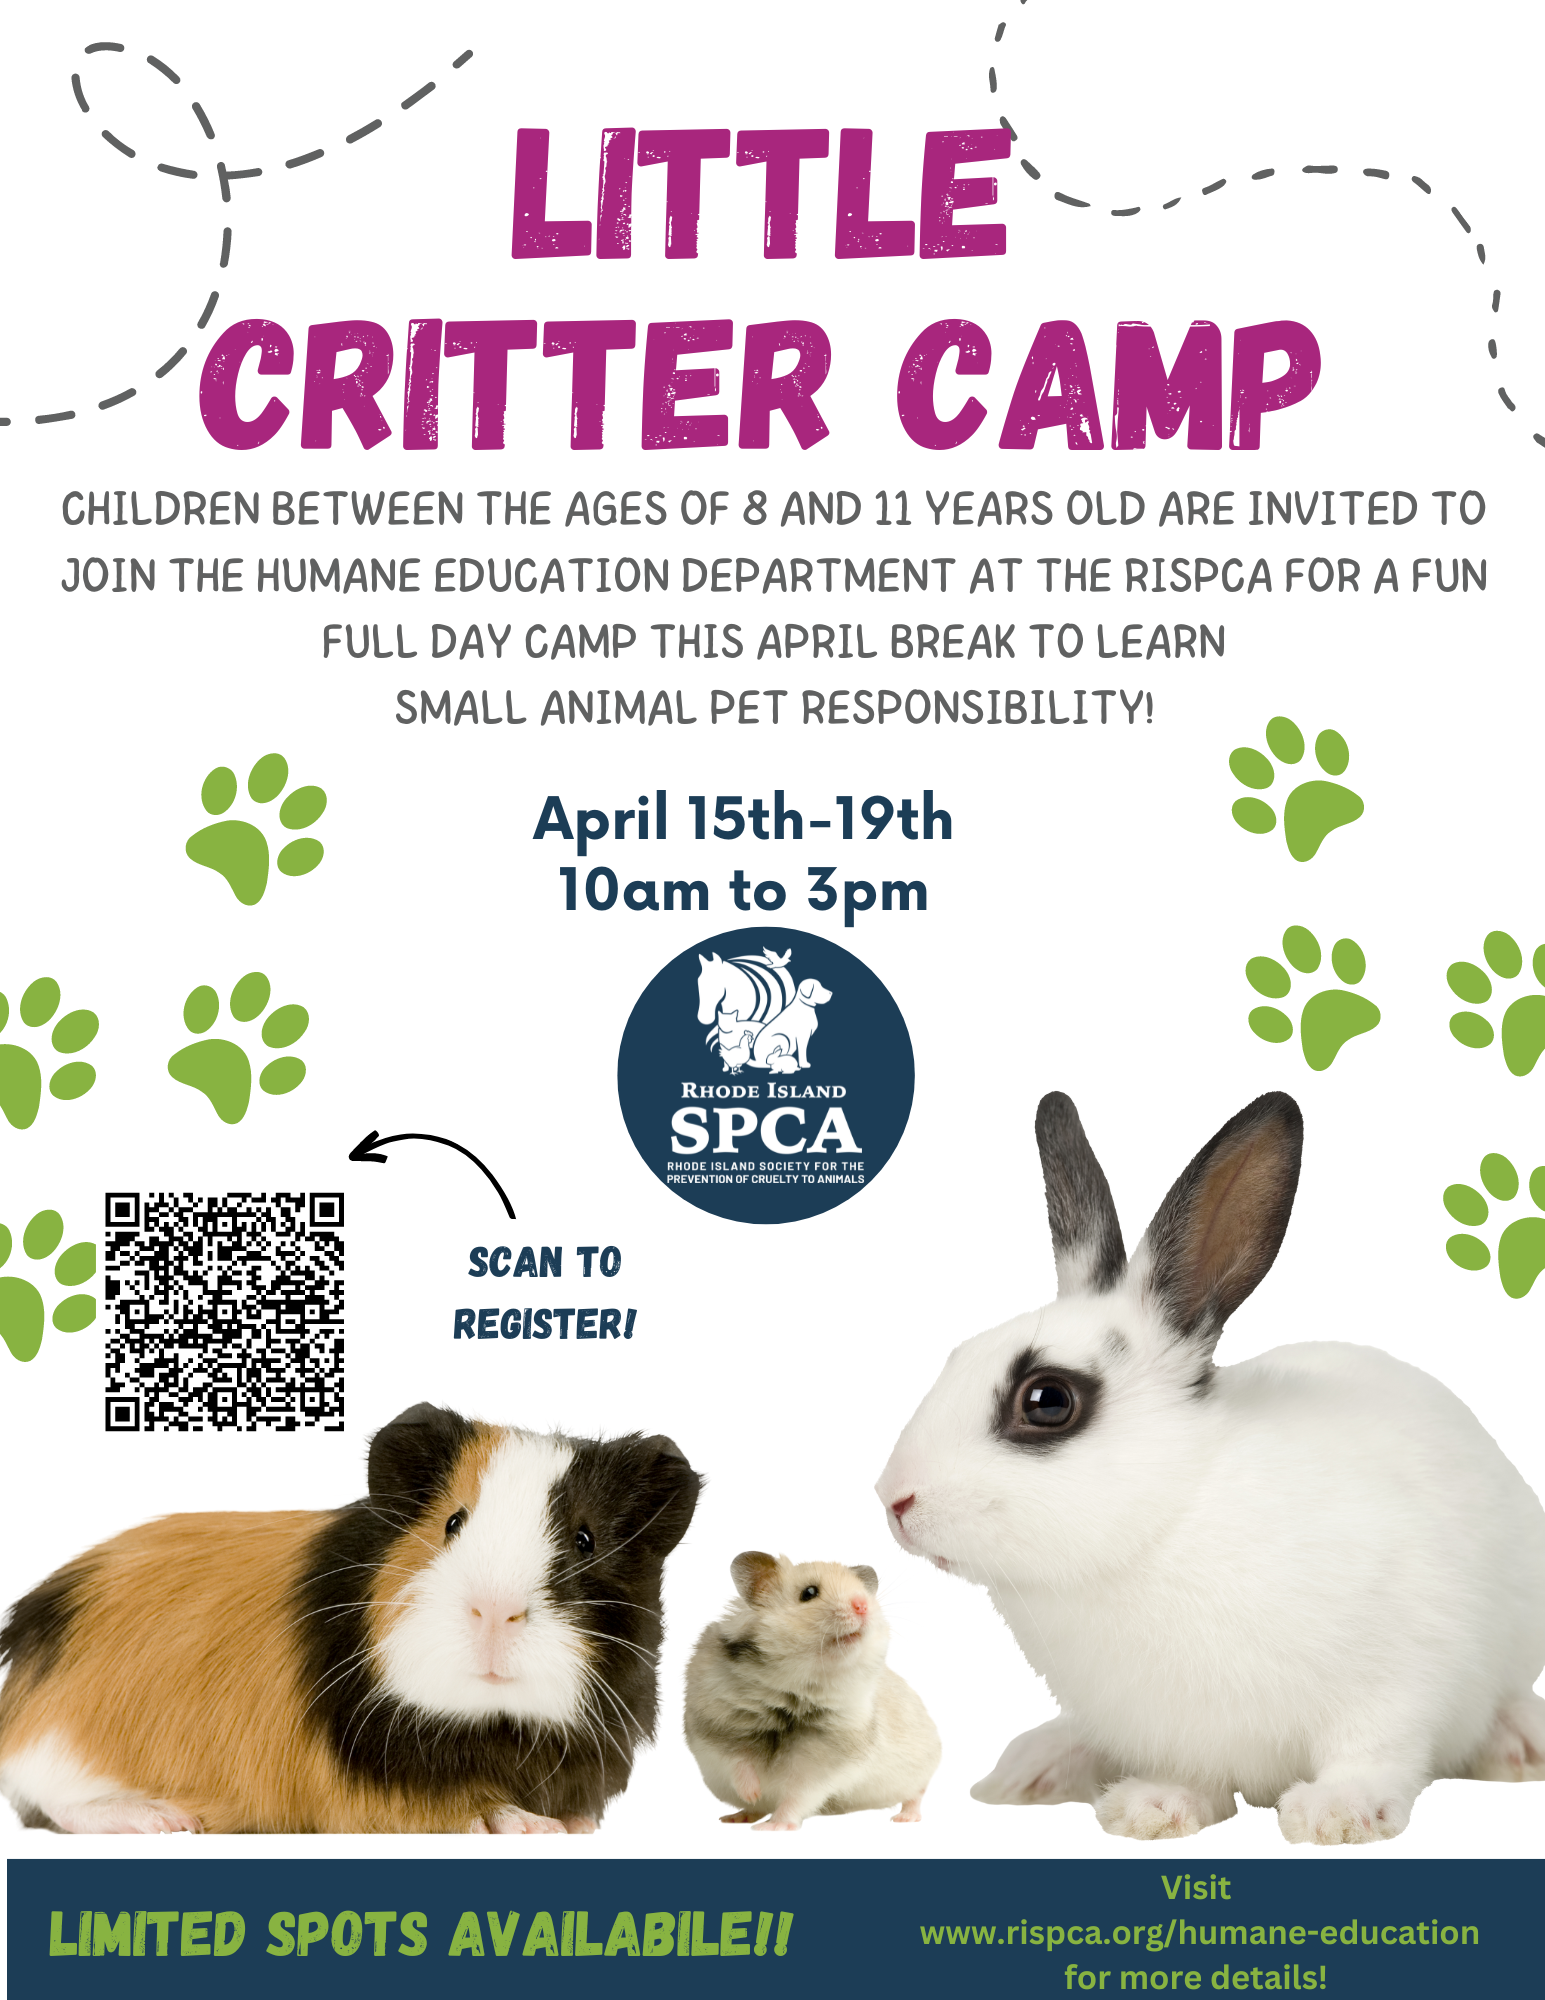 Little Critter April Vacation Camp Flyer